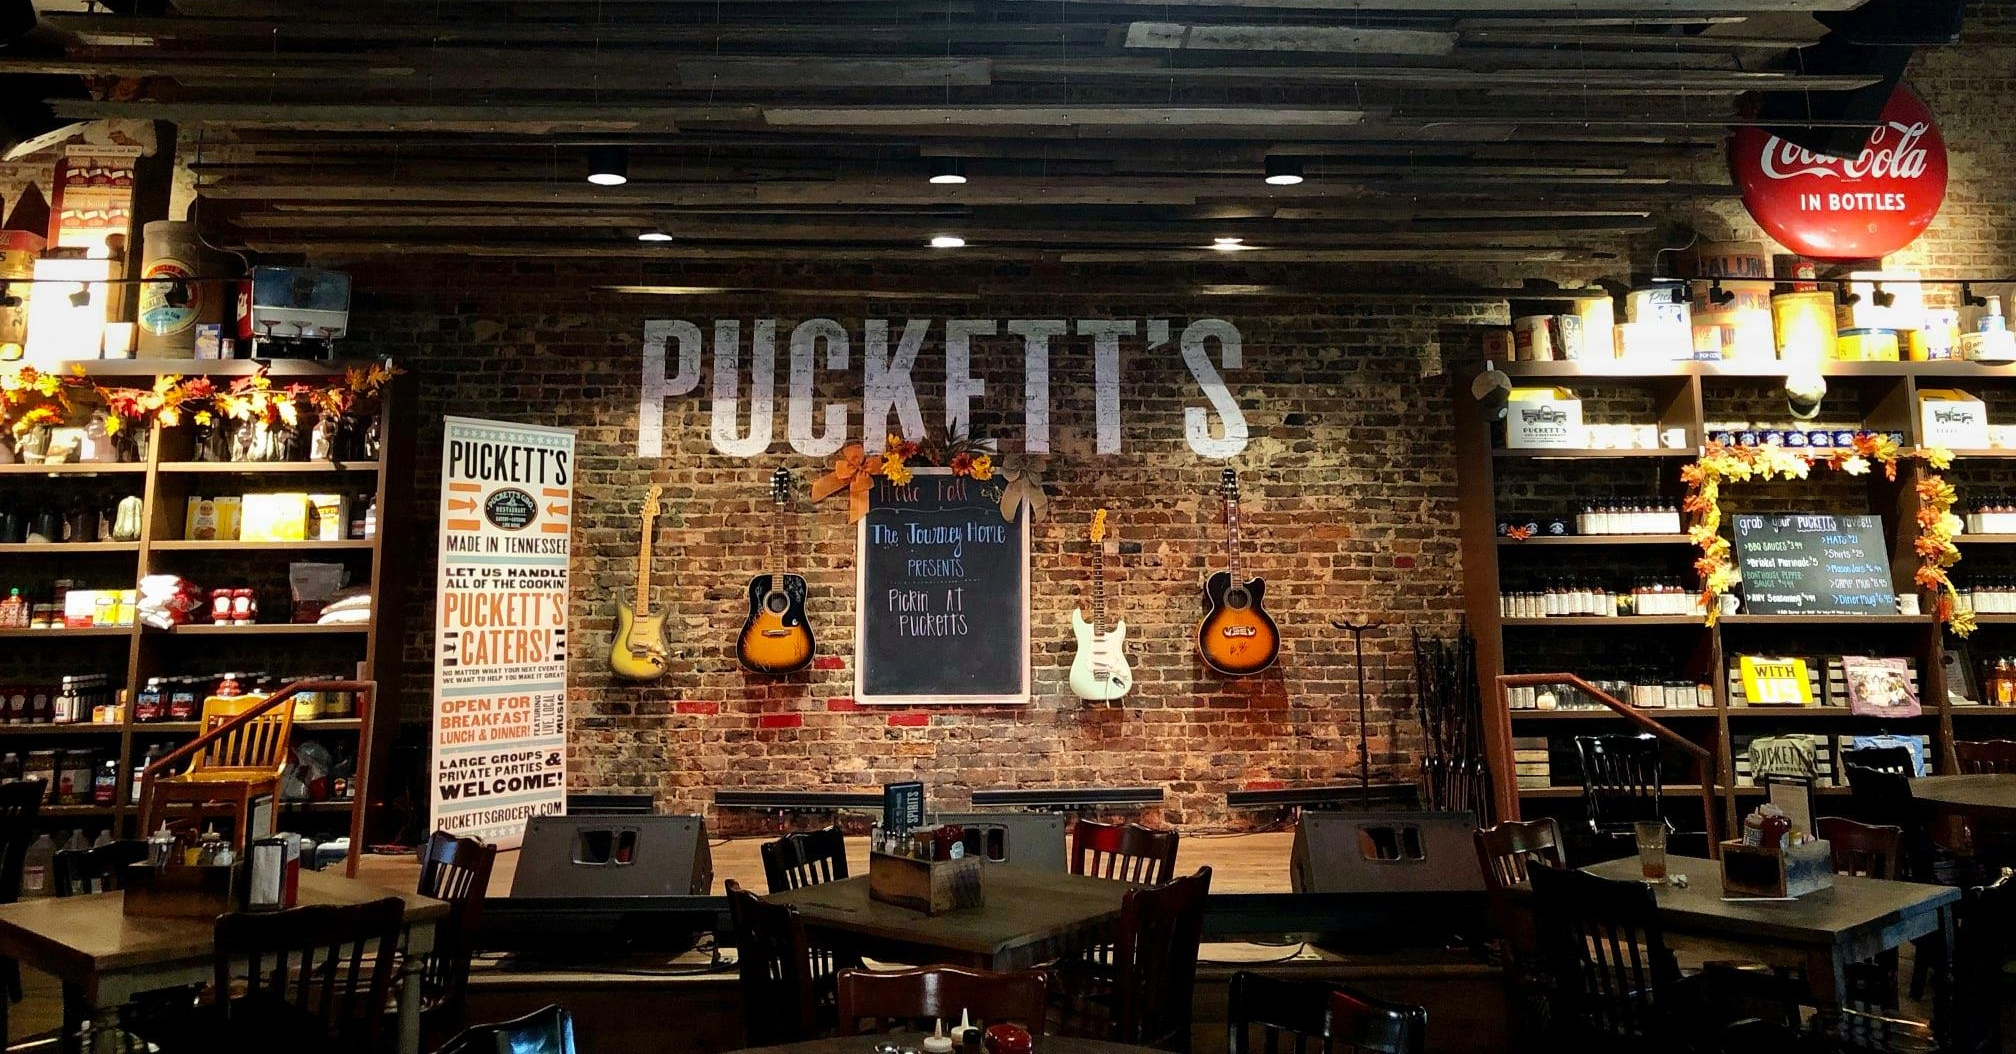 Pucketts Grocery in downtown Franklin, TN offers breakfast, lunch, dinner, beer, wine cocktails and more in an open dining area.